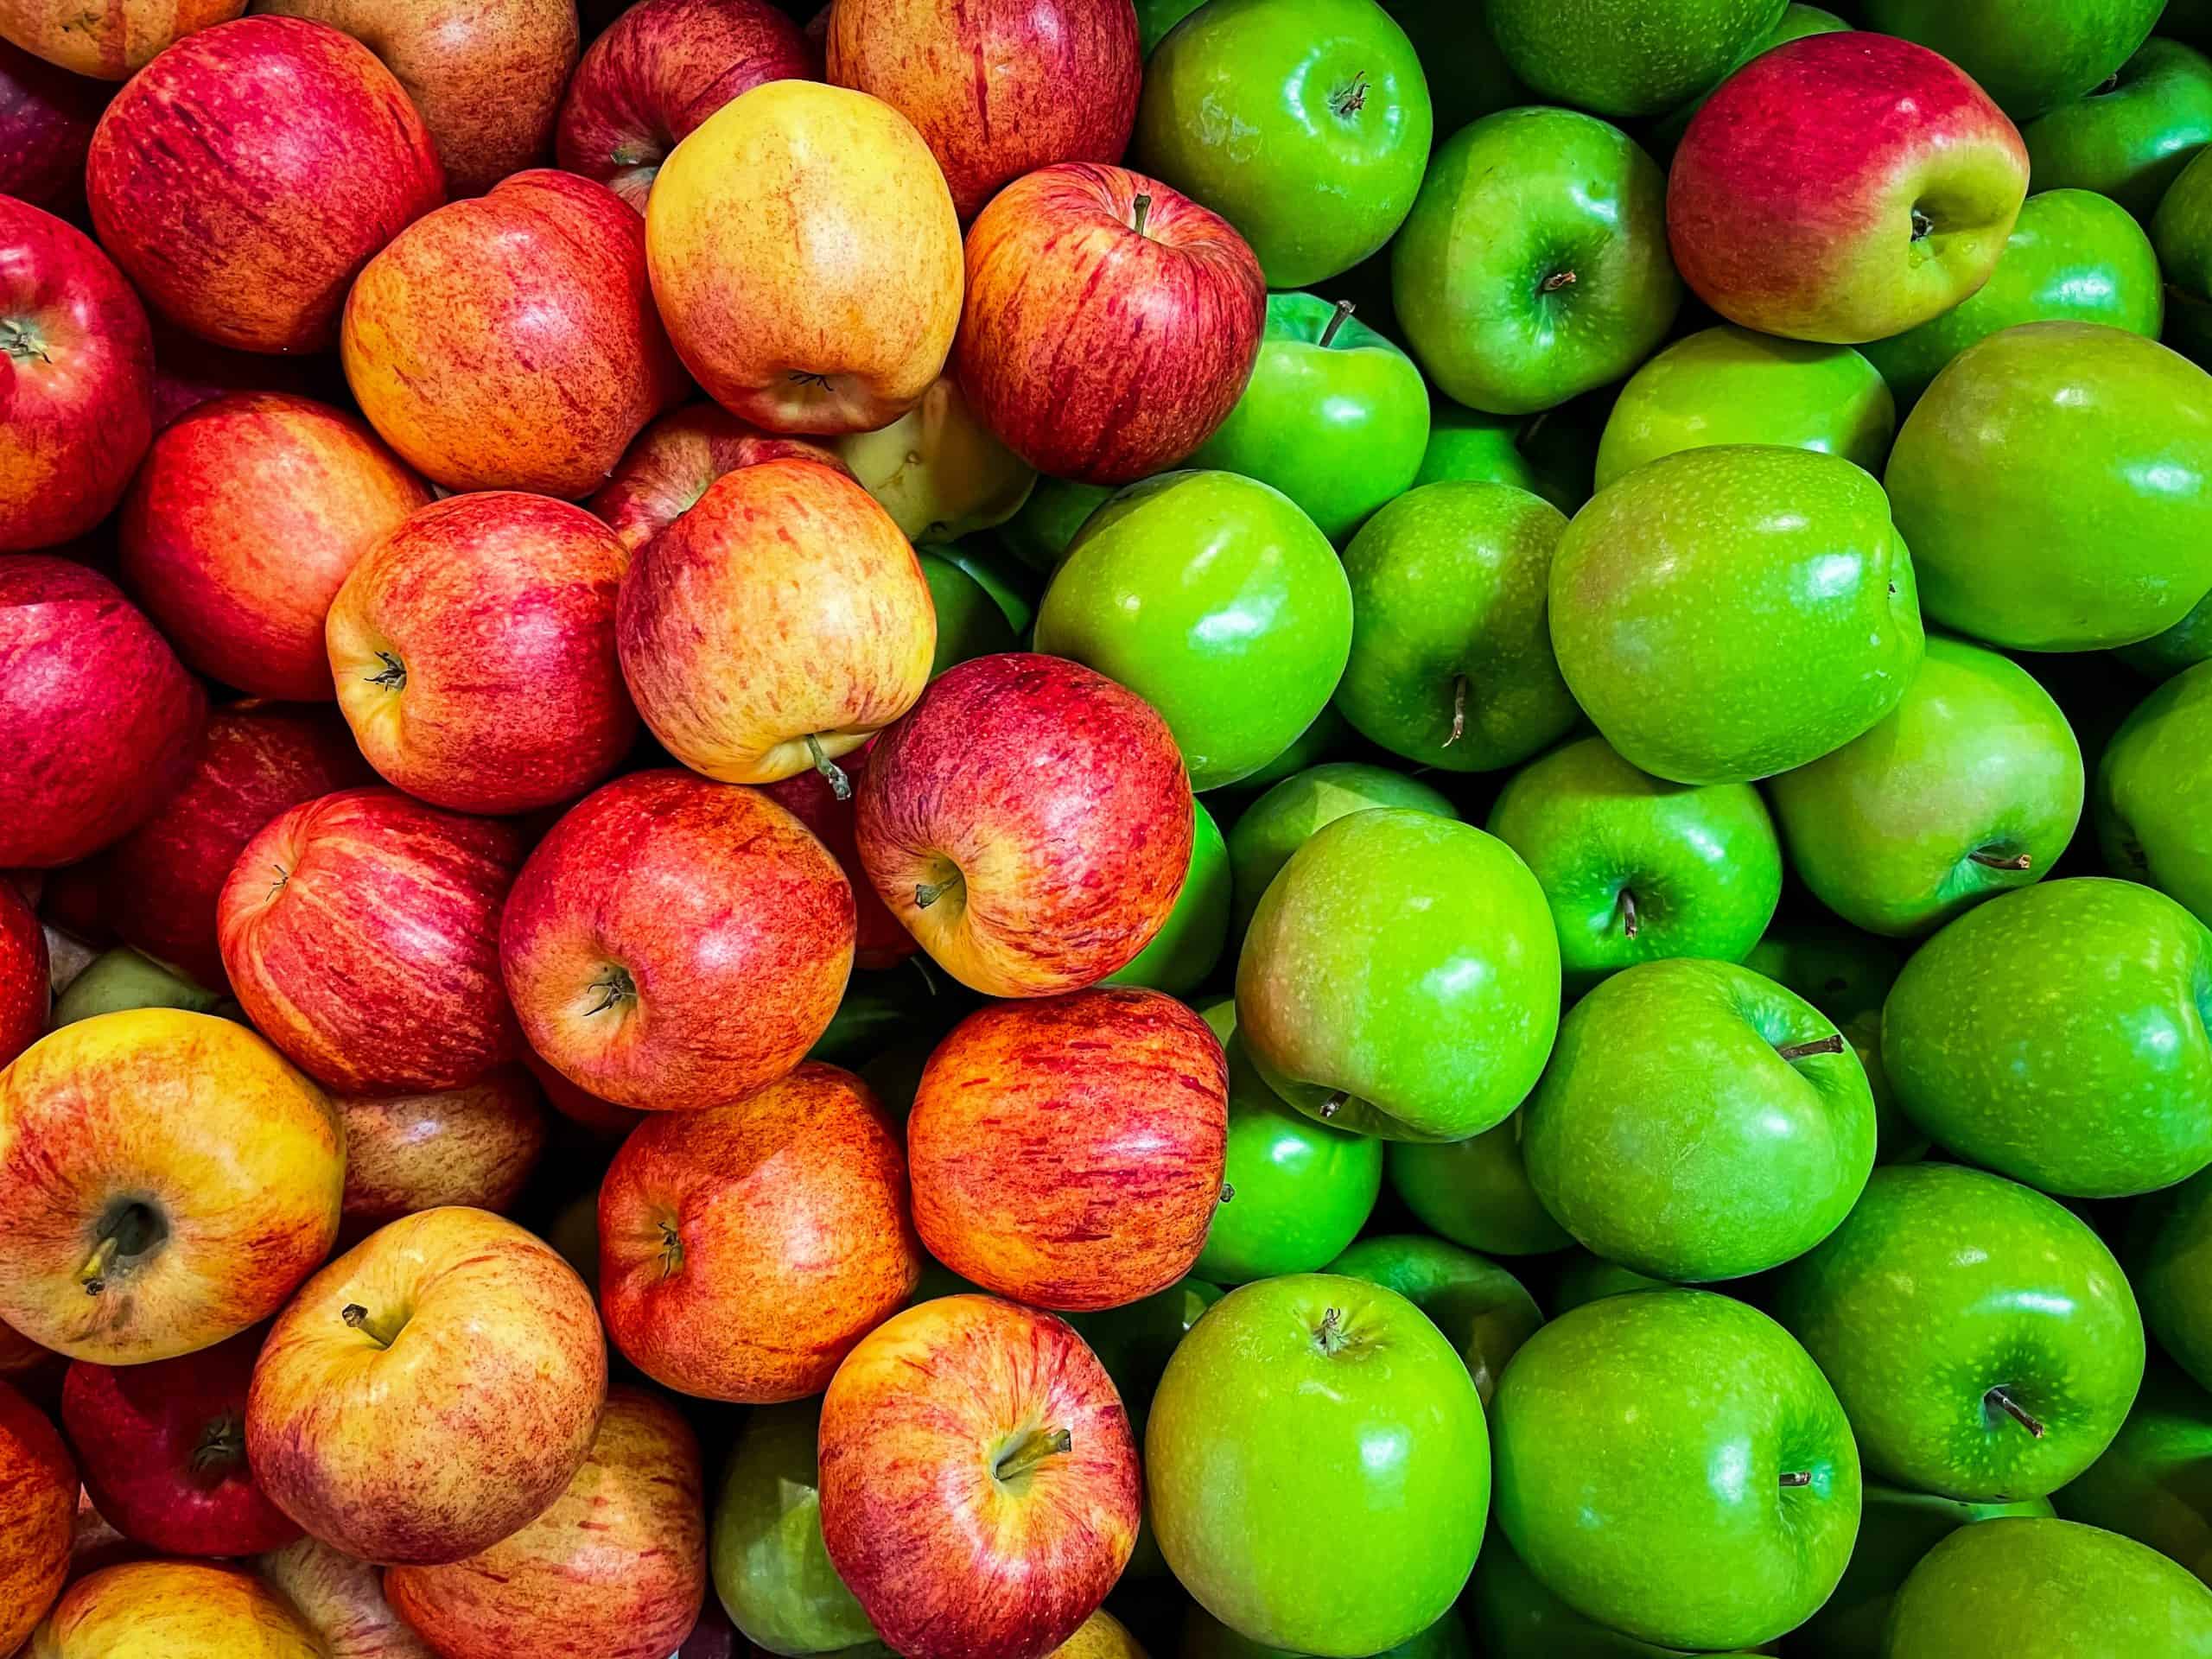 A pile of red, green, and yellow apples.